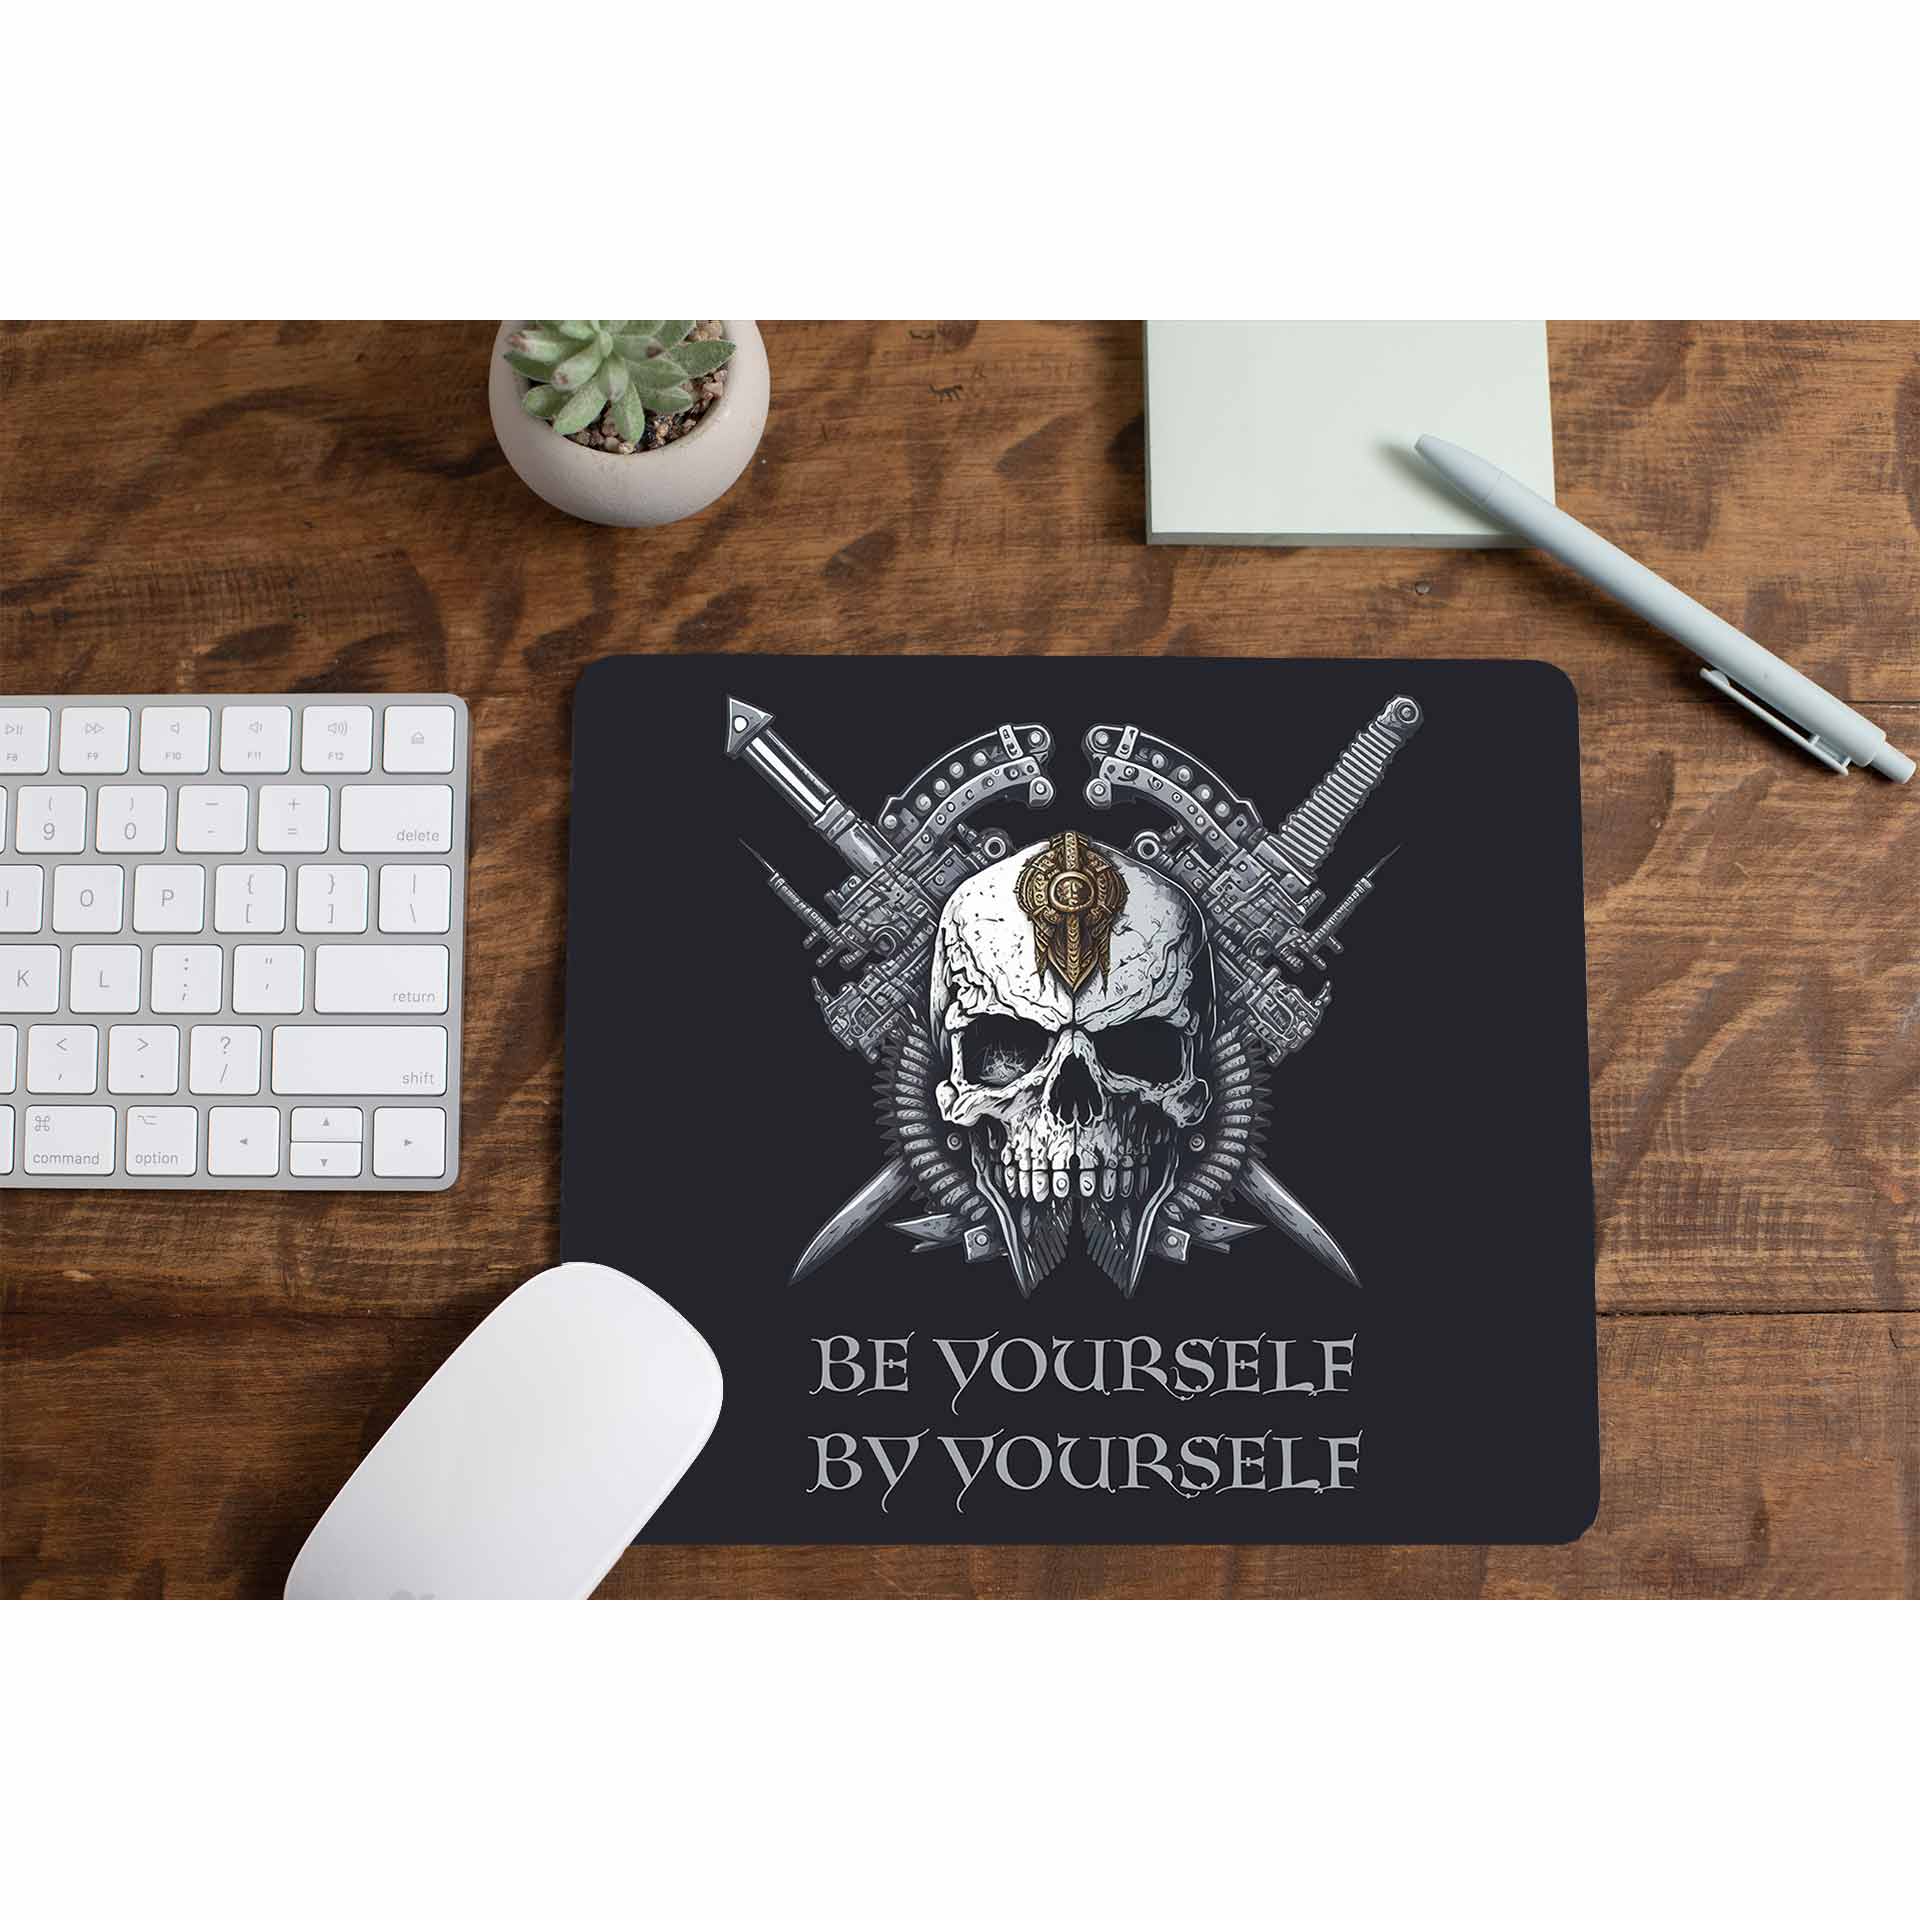 pantera be yourself by yourself mousepad logitech large anime music band buy online united states of america usa the banyan tee tbt men women girls boys unisex